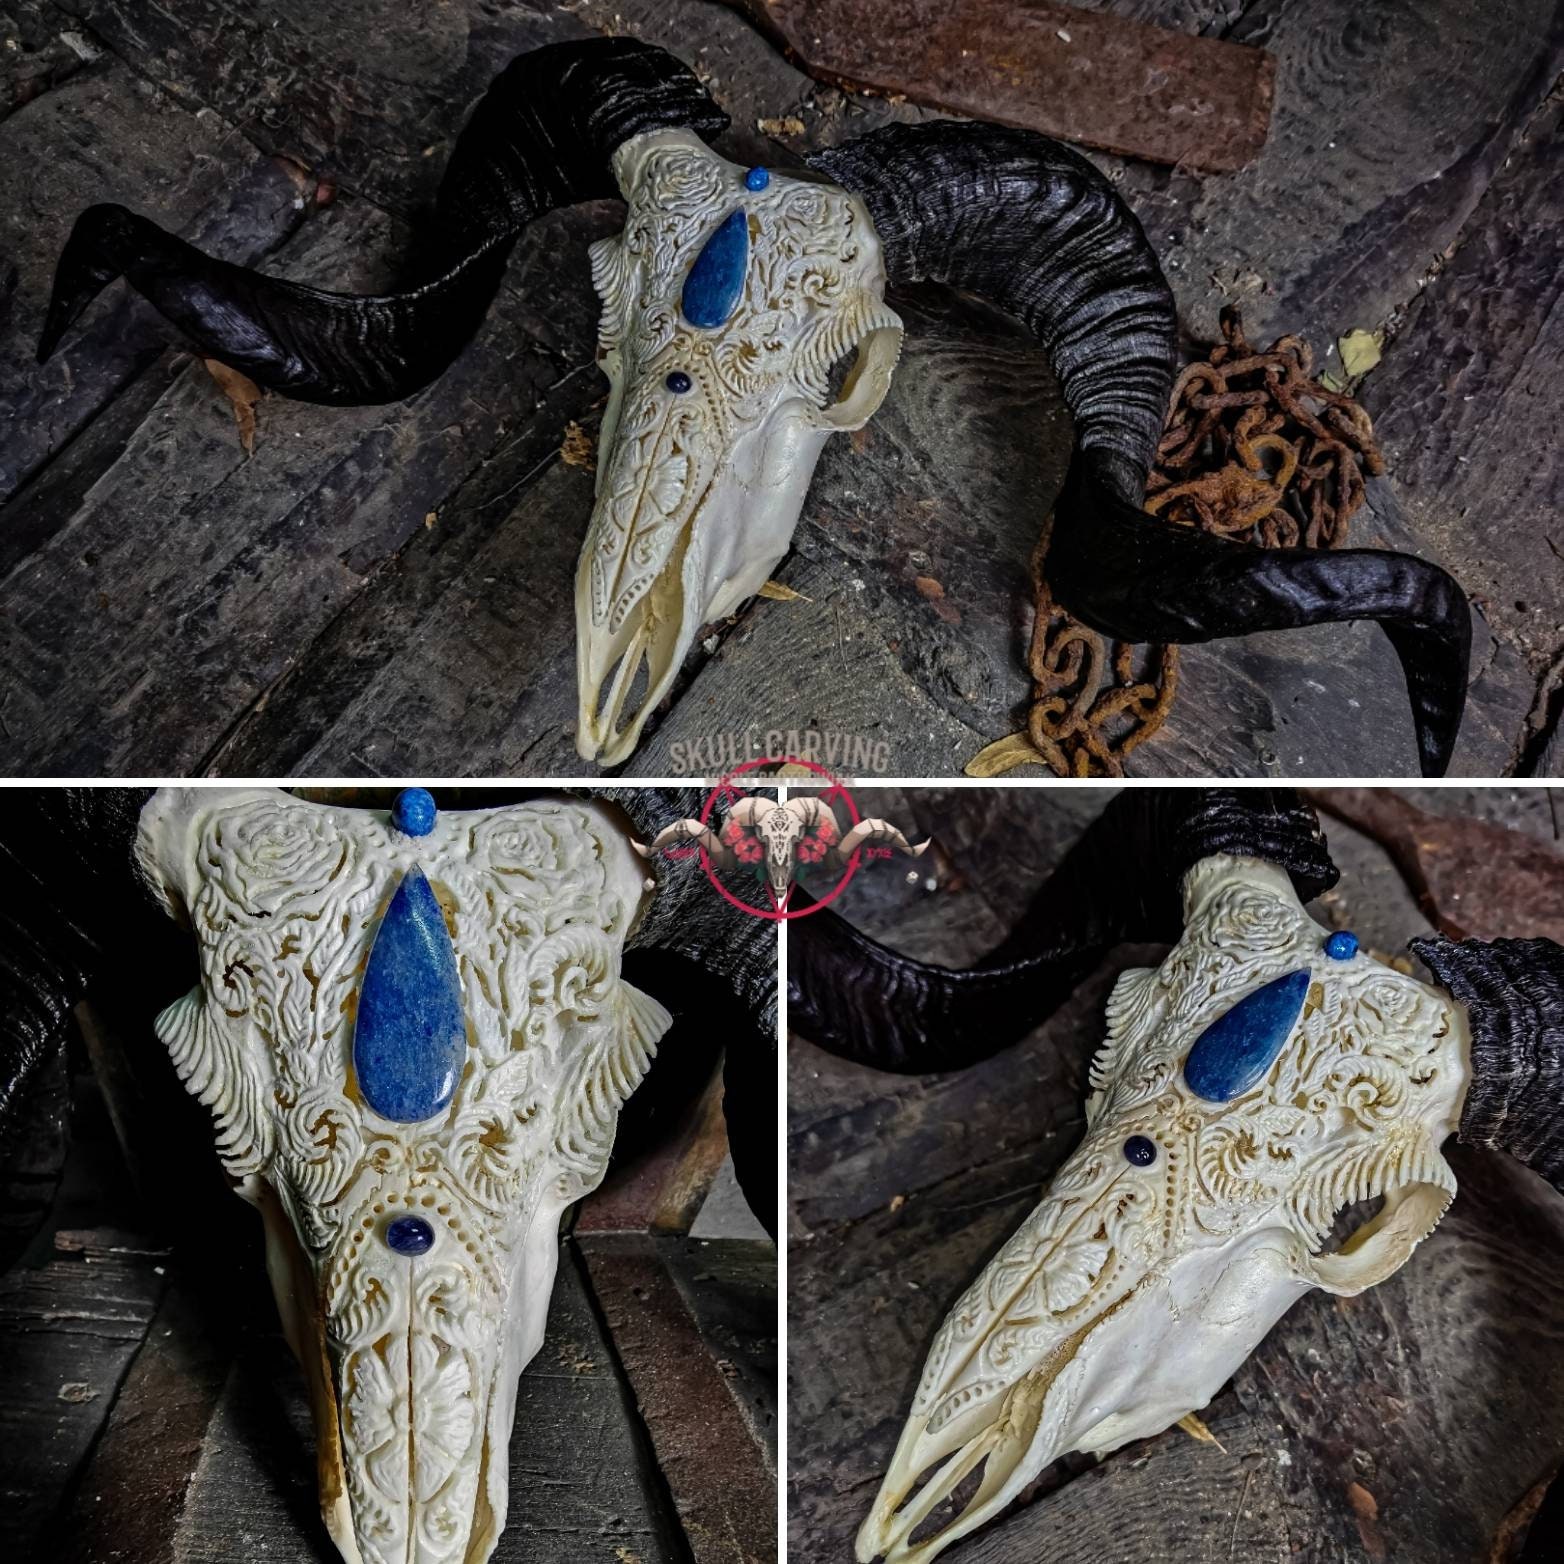 Made To Order Real Ram Skull Nice Big Horns Antlers With Real Blue Stone Cabochon Ornaments Filigree Sculpture Roses Gift Idea Christmas Art